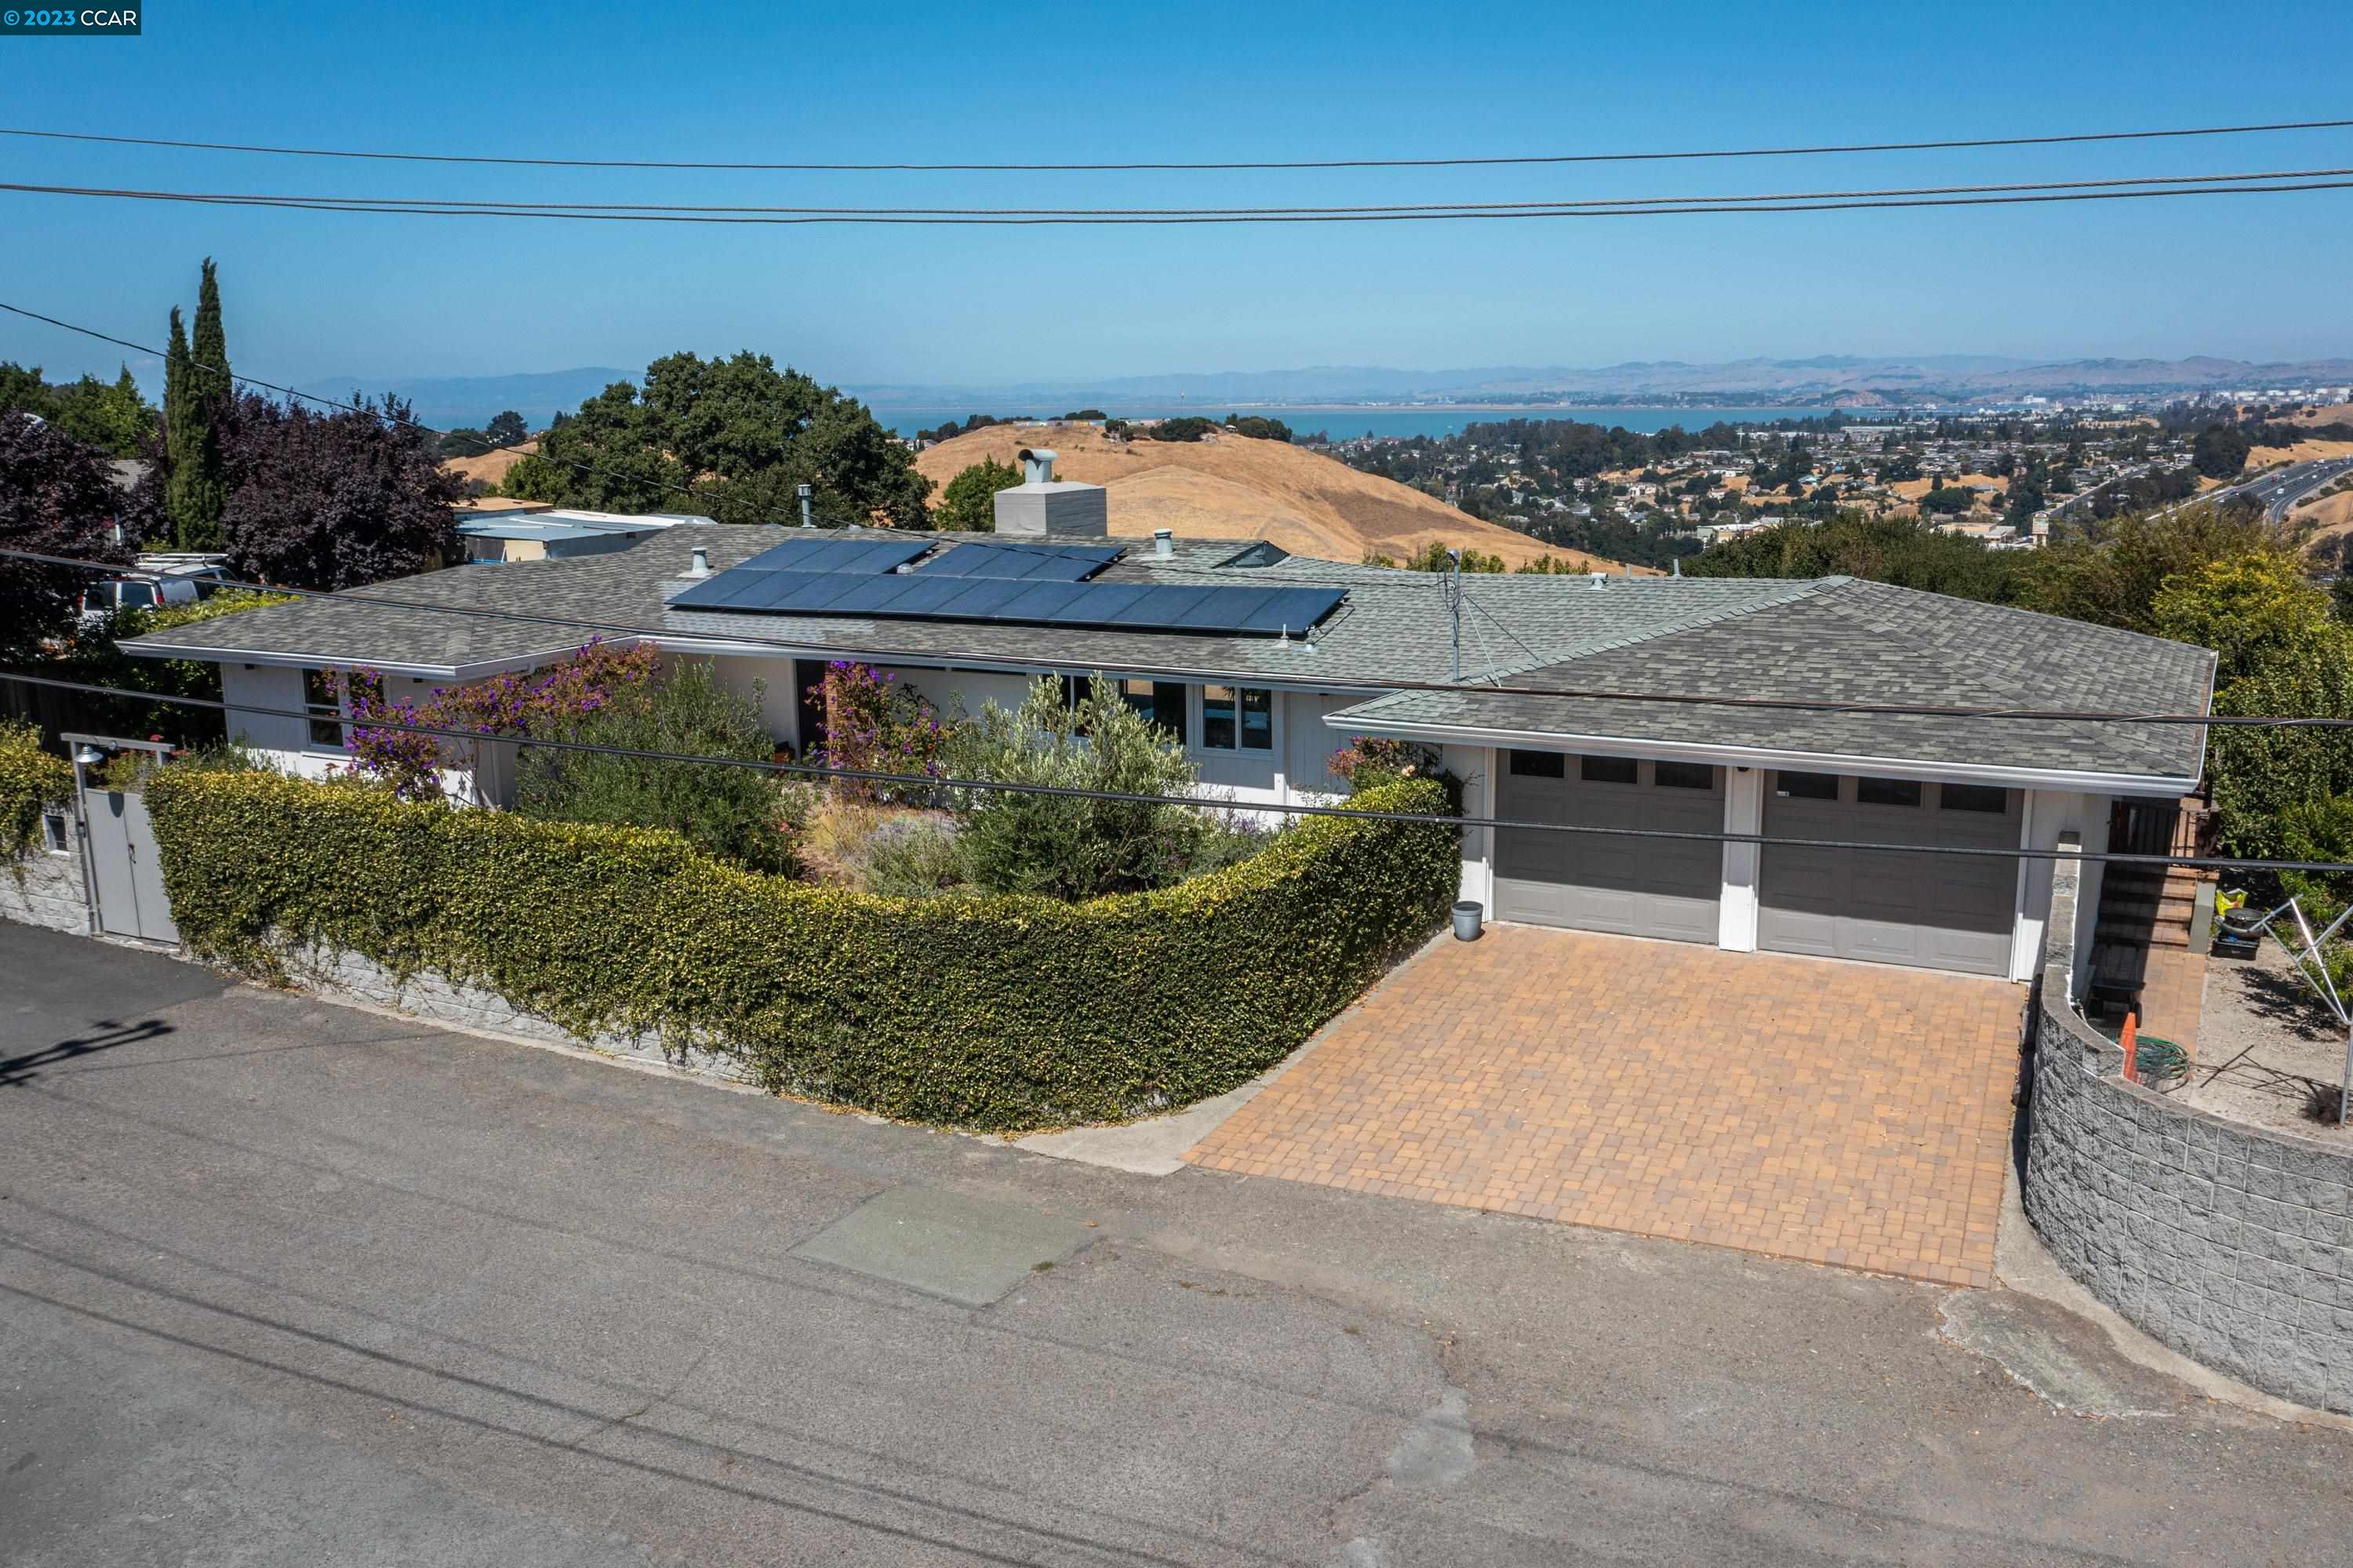 Single story, indoor/outdoor living in this showcase home atop a ridge with expansive views of shimmering San Pablo Bay. Built to take full advantage of the location, almost every room opens to panoramic view & a huge patio runs across the back of house down to large pool & abundant kitchen garden. The ocean fog that often lingers over the west face of the Berkeley hills breaks up as it crests this mountain range but not before adding precious moisture to the air. The mix of added moisture & longer hours of sunlight means plants thrive, the heat is tempered, & the 22 solar panels soak up the savings. As you enter the compound & walk through the drought tolerant meadow of flowers, grasses & olive trees, the home’s ‘secret garden’ welcomes you with serenity & calm. A graceful entry to breathtaking views, bright open floorplan with many upgrades & lovingly cared for mid-century features. Airy kitchen boasts garden views from the sink & bay views from the range. Interior access to spacious laundry-mudroom provides separation for a fourth bedroom with ensuite bath – perfect for in-law/au pair or potential ADU. Fully usable ½ acre lot includes side yard with fruit trees & enough space for RV/boat. The location affords easy freeway access within a secluded neighborhood.